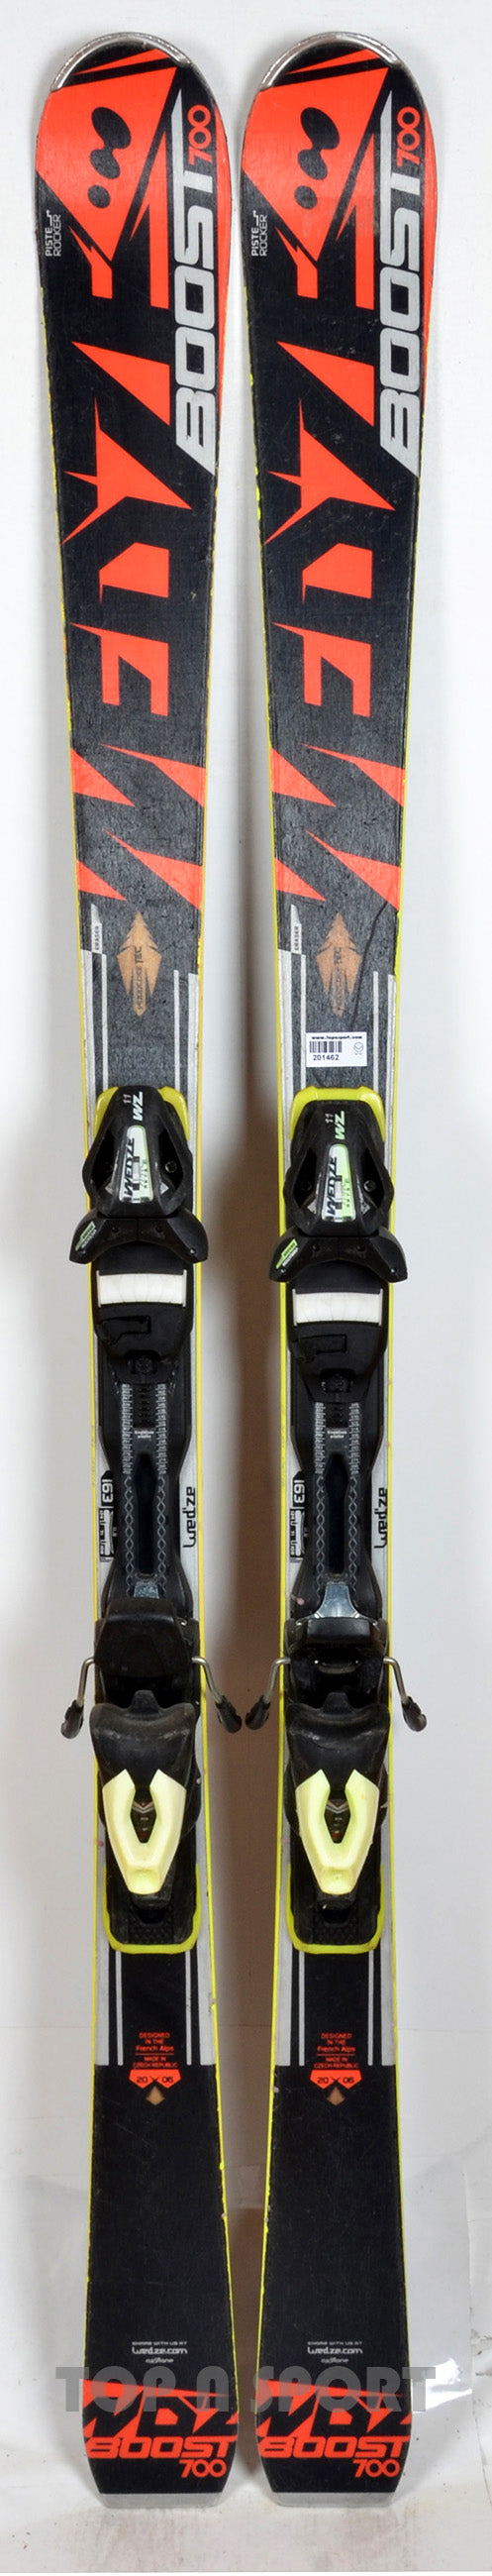 Wedze BOOST 700 - skis d'occasion